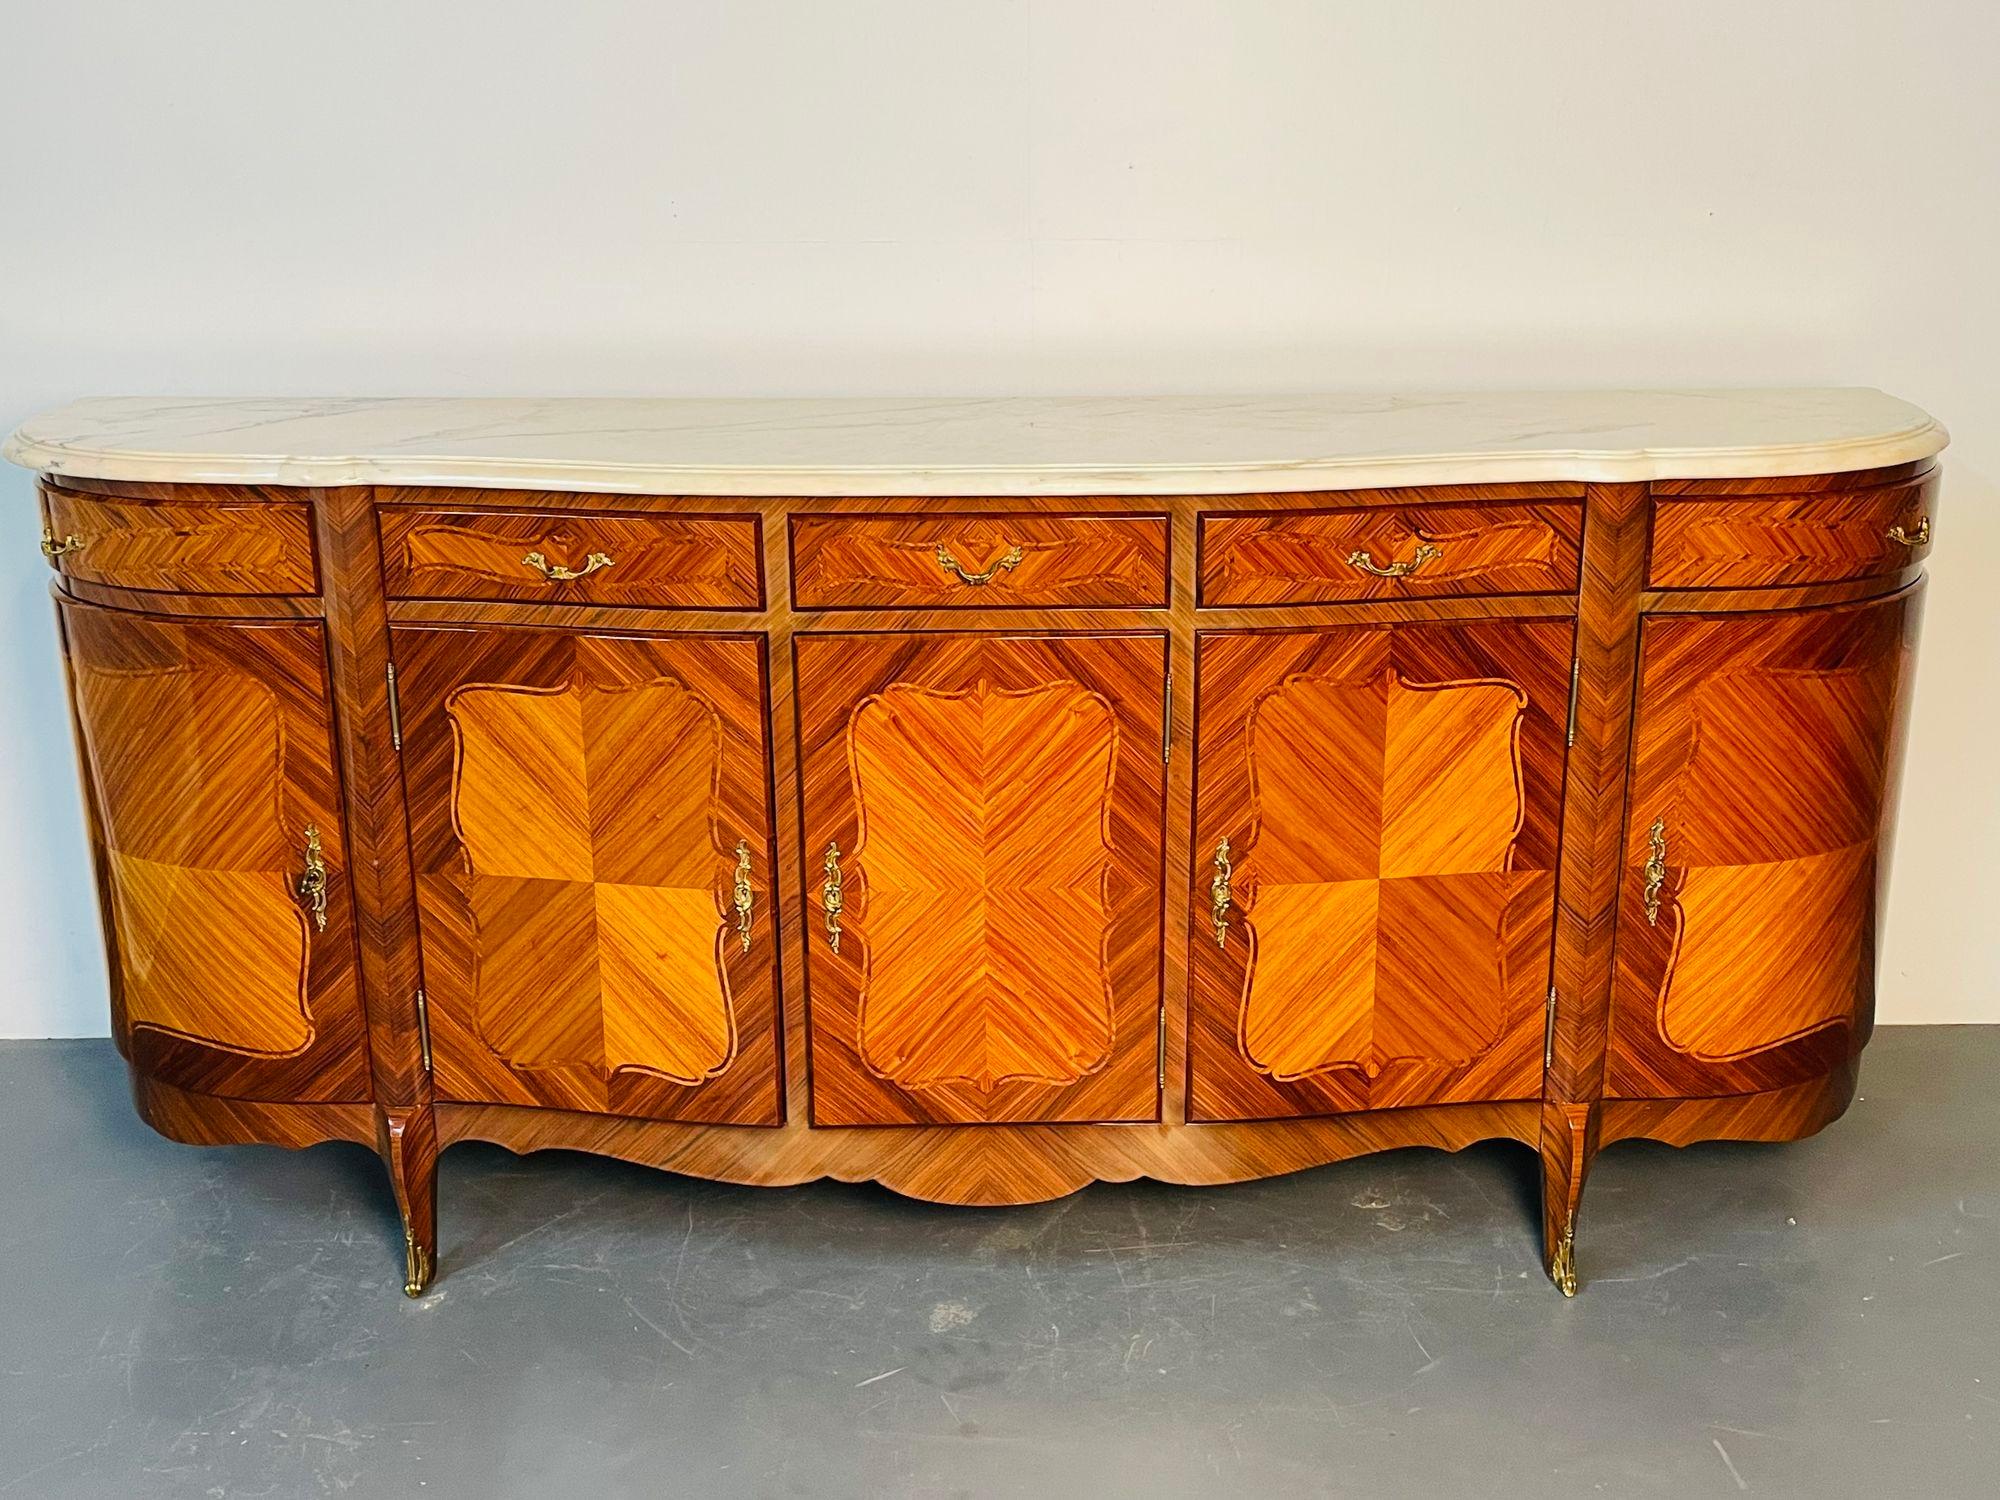 Monumental French Louis XV Style Rosewood Inlaid Sideboard, Bronze Mounted
A French Inlaid Louis XV style Sideboard, Credenza, Buffet of Monumental Form having a thick marble top with pink hues supported by a vintage custom French cabinet maker